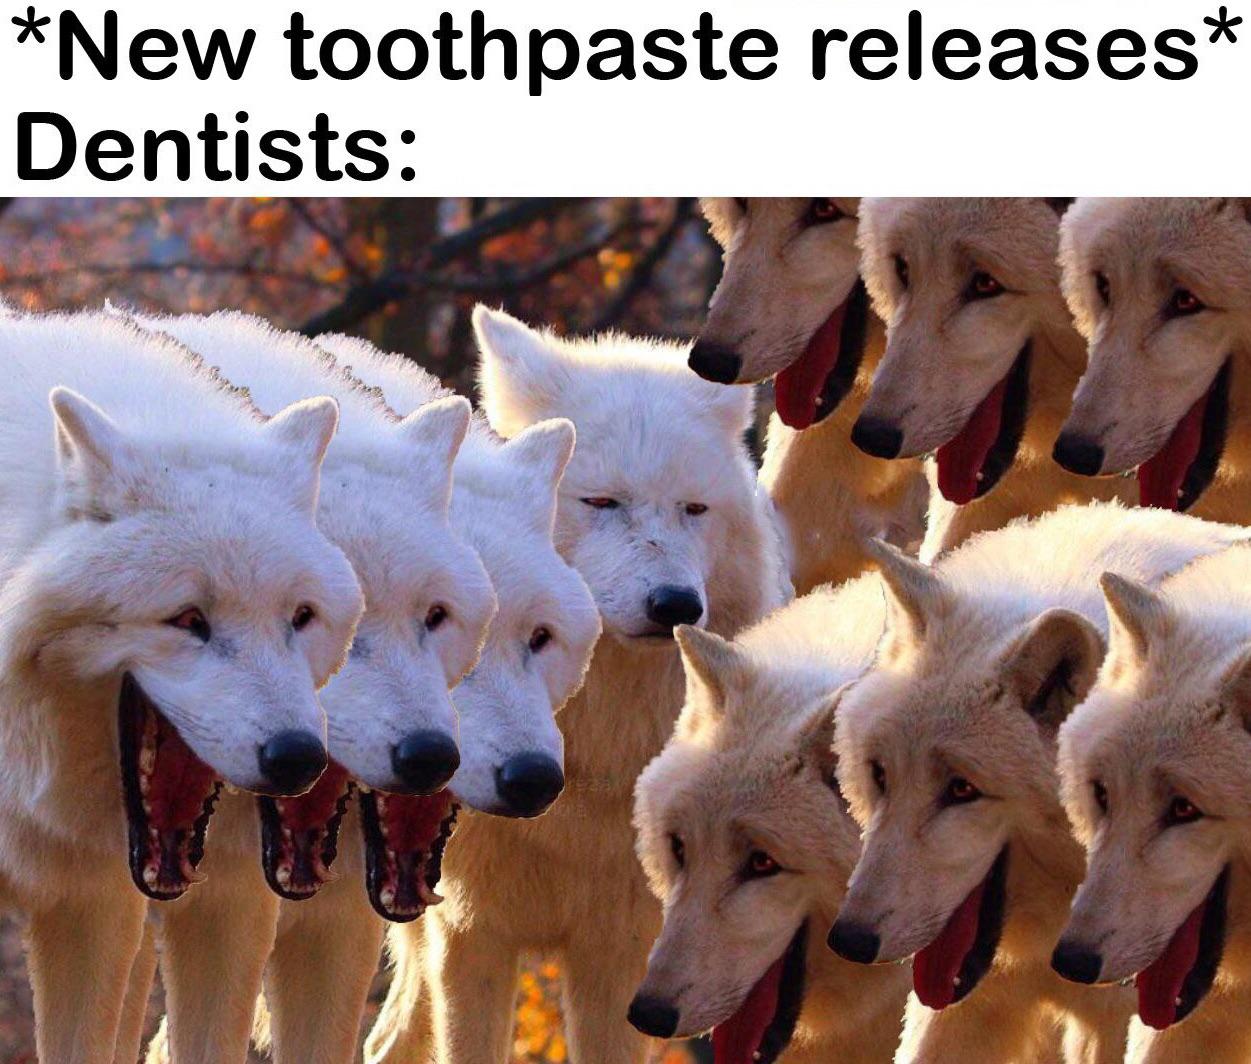 Dank, WgXcQ, VvVC, Qw4, INVEST Dank Memes Dank, WgXcQ, VvVC, Qw4, INVEST text: New toothpaste releases* Dentists: 